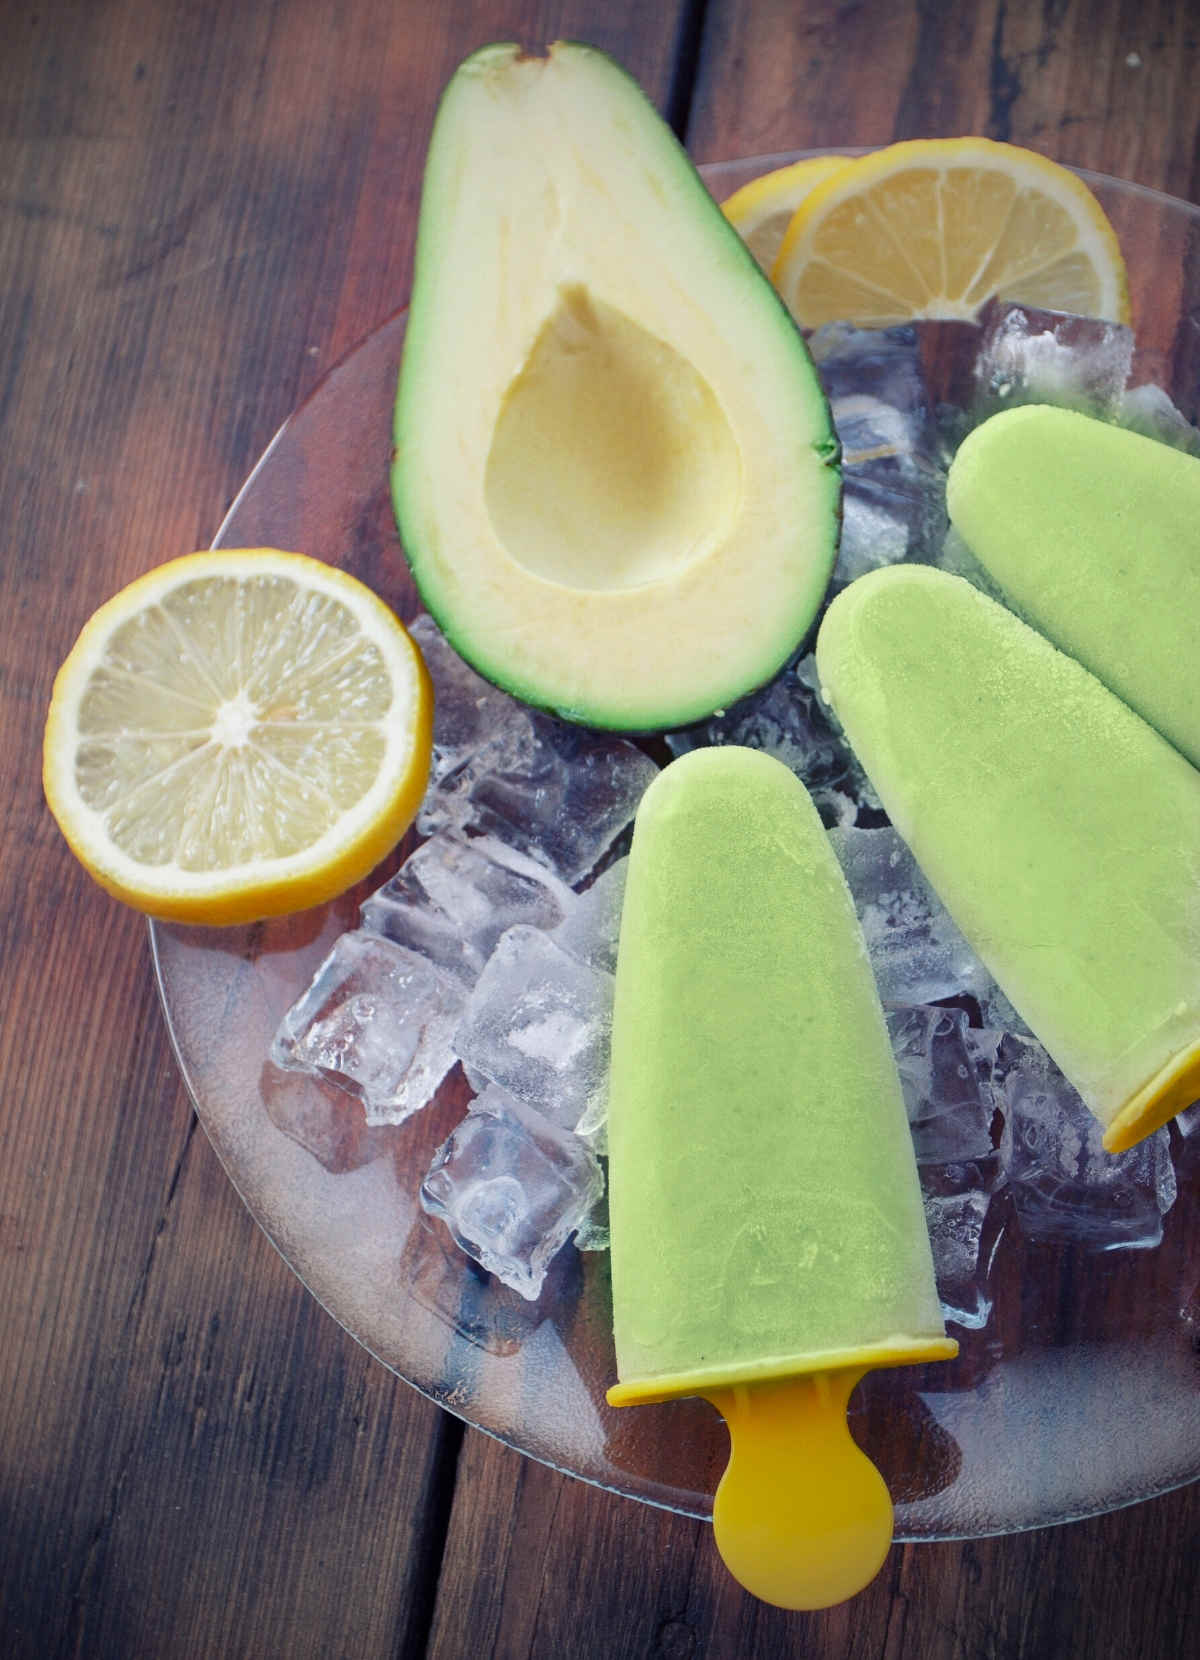 Avocado ice pops / popsicles for toddlers.